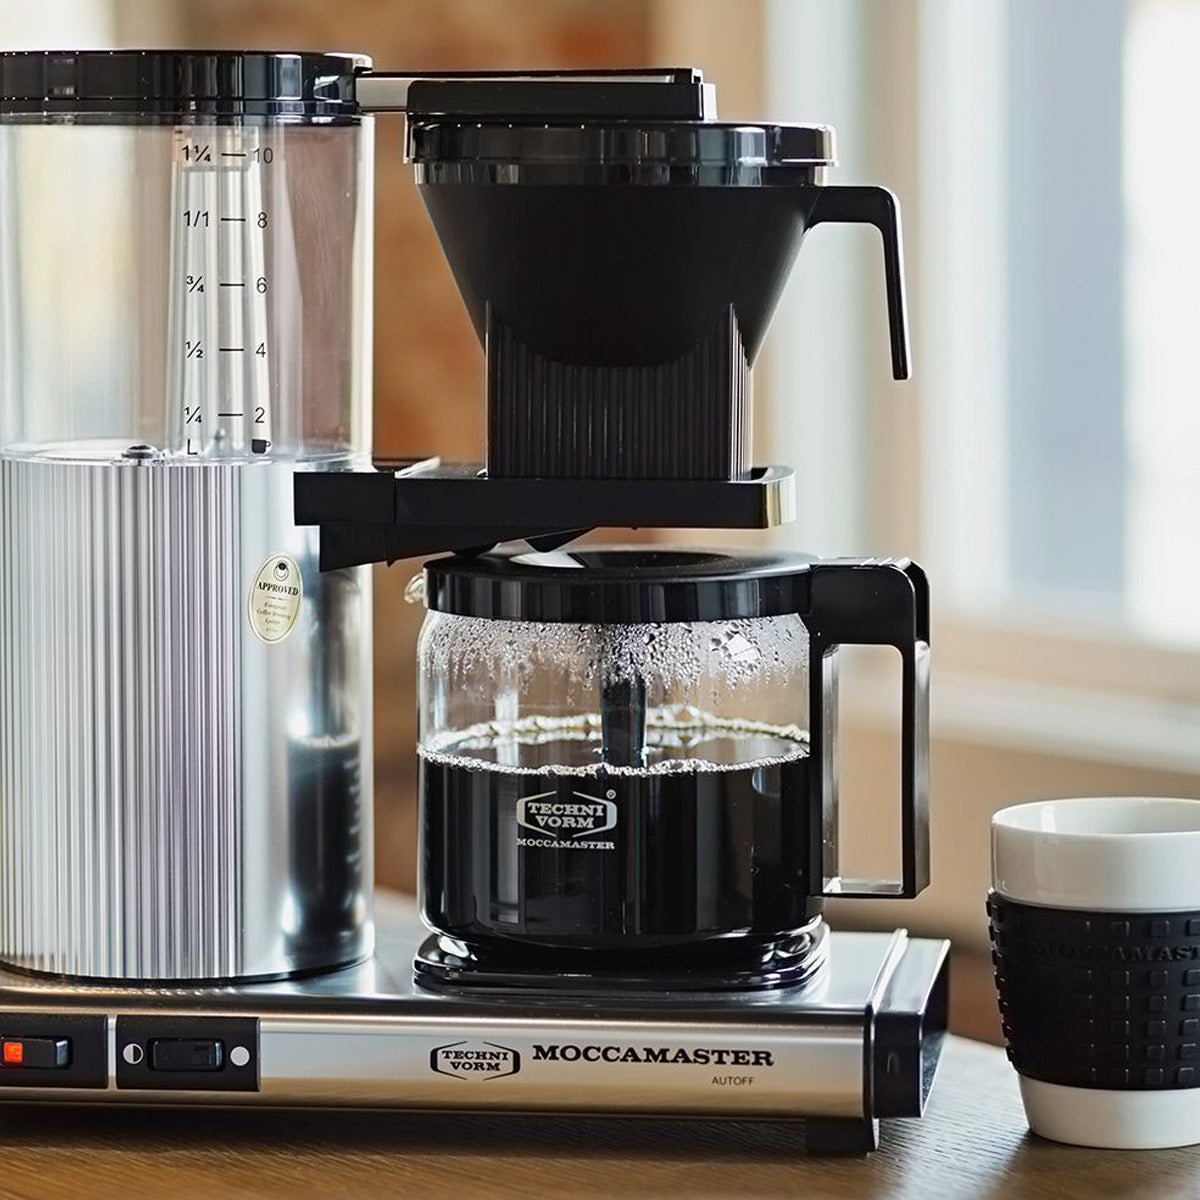 Moccamaster Coffee Maker Review: A Stylish Pour-Over Coffee Maker